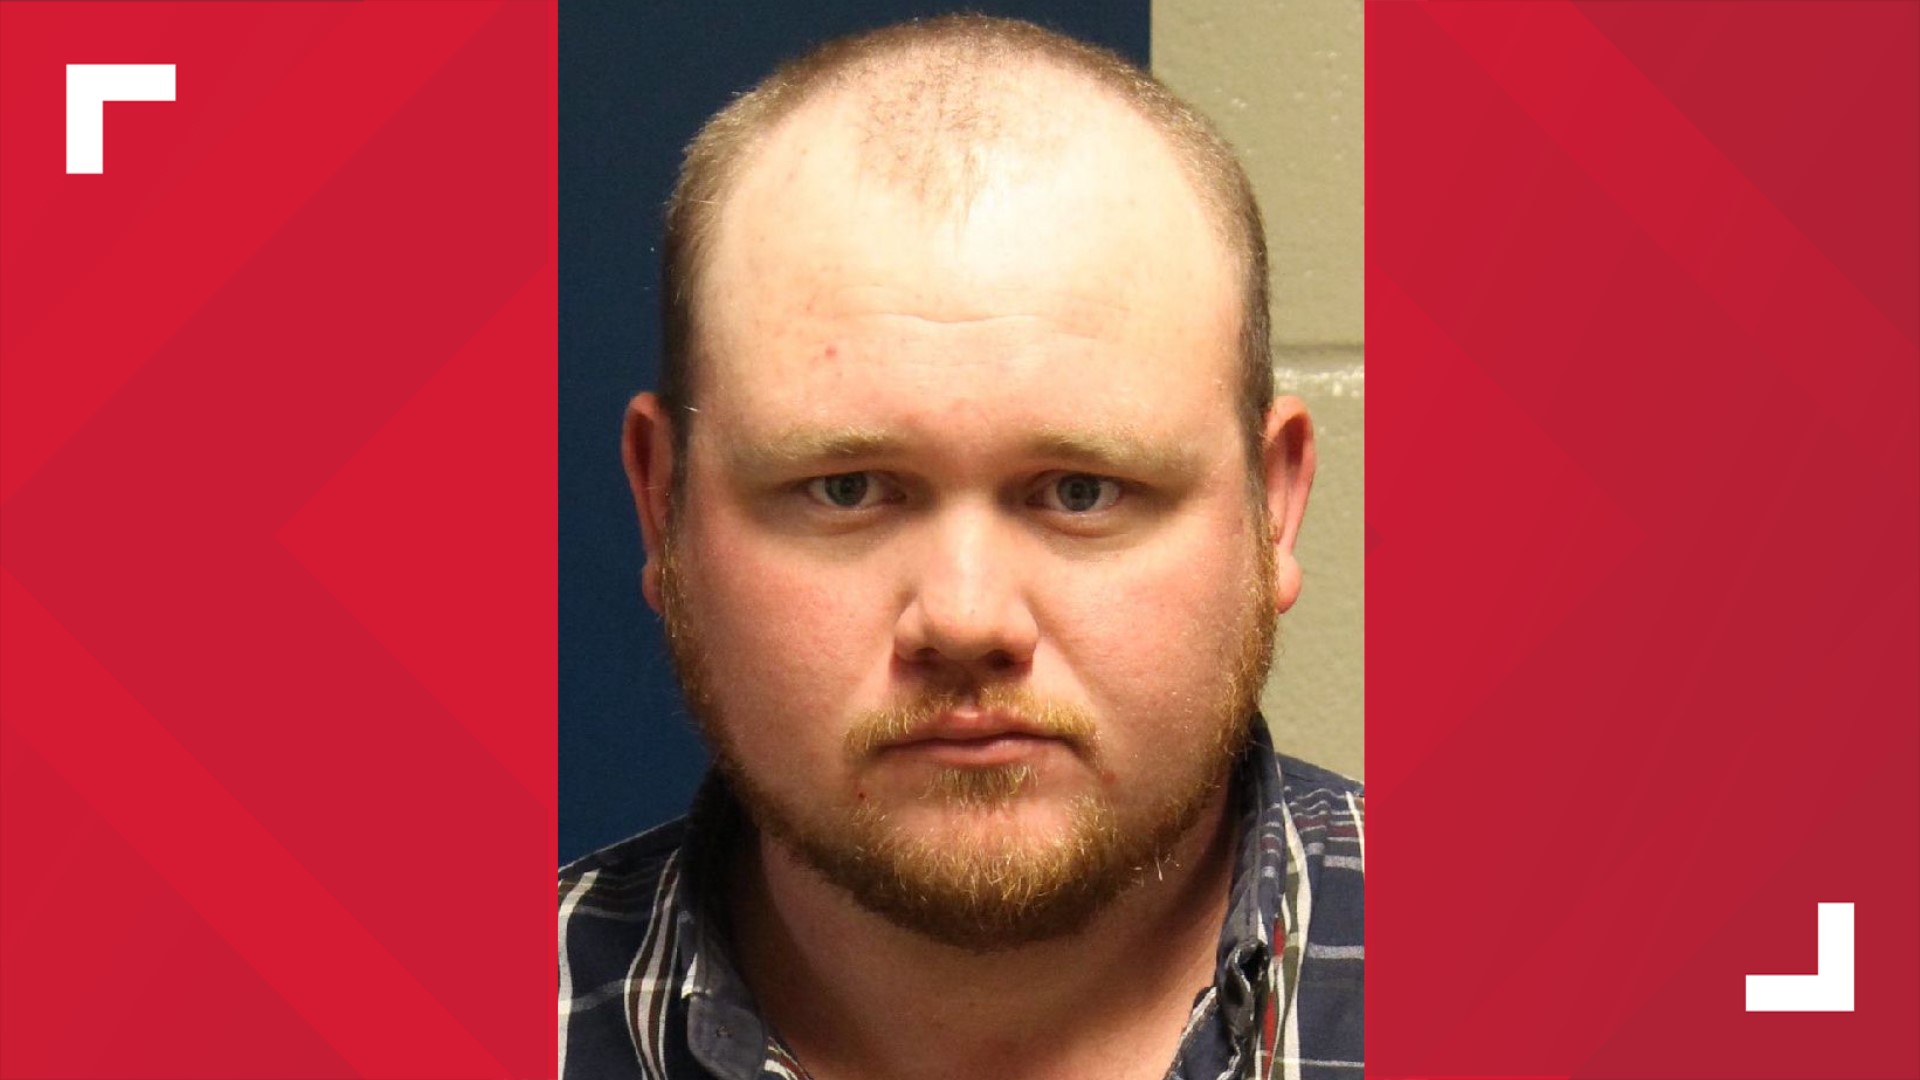 Hardin County man indicted for raping a minor